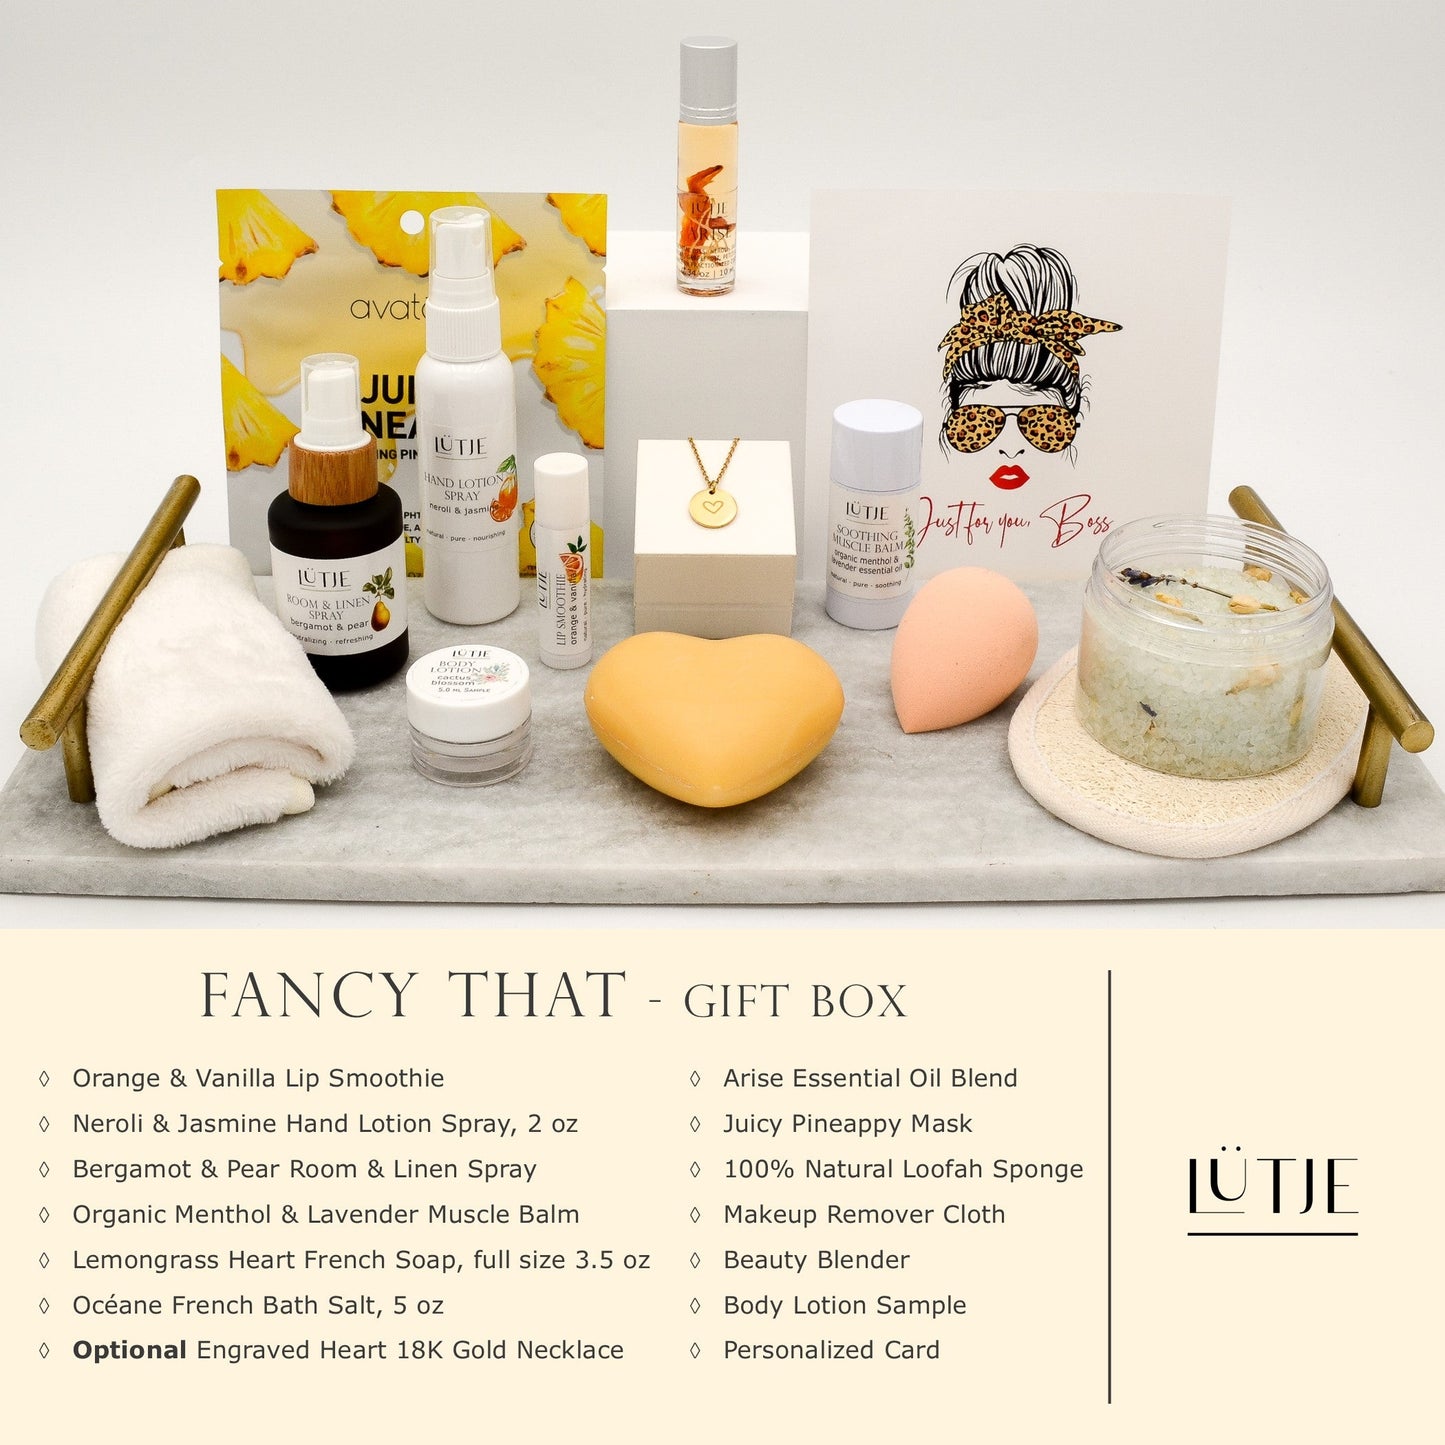 Fancy That Gift Box for women, BFF, wife, daughter, sister, mom, or grandma, includes Neroli & Jasmine hand lotion spray, essential oil, lip balm, soothing muscle balm, Bergamot & Pear room & linen spray, French soap, French bath salts, hydrating face mask, other bath, spa and self-care items, and optional 18K gold-plated necklace with engraved heart.